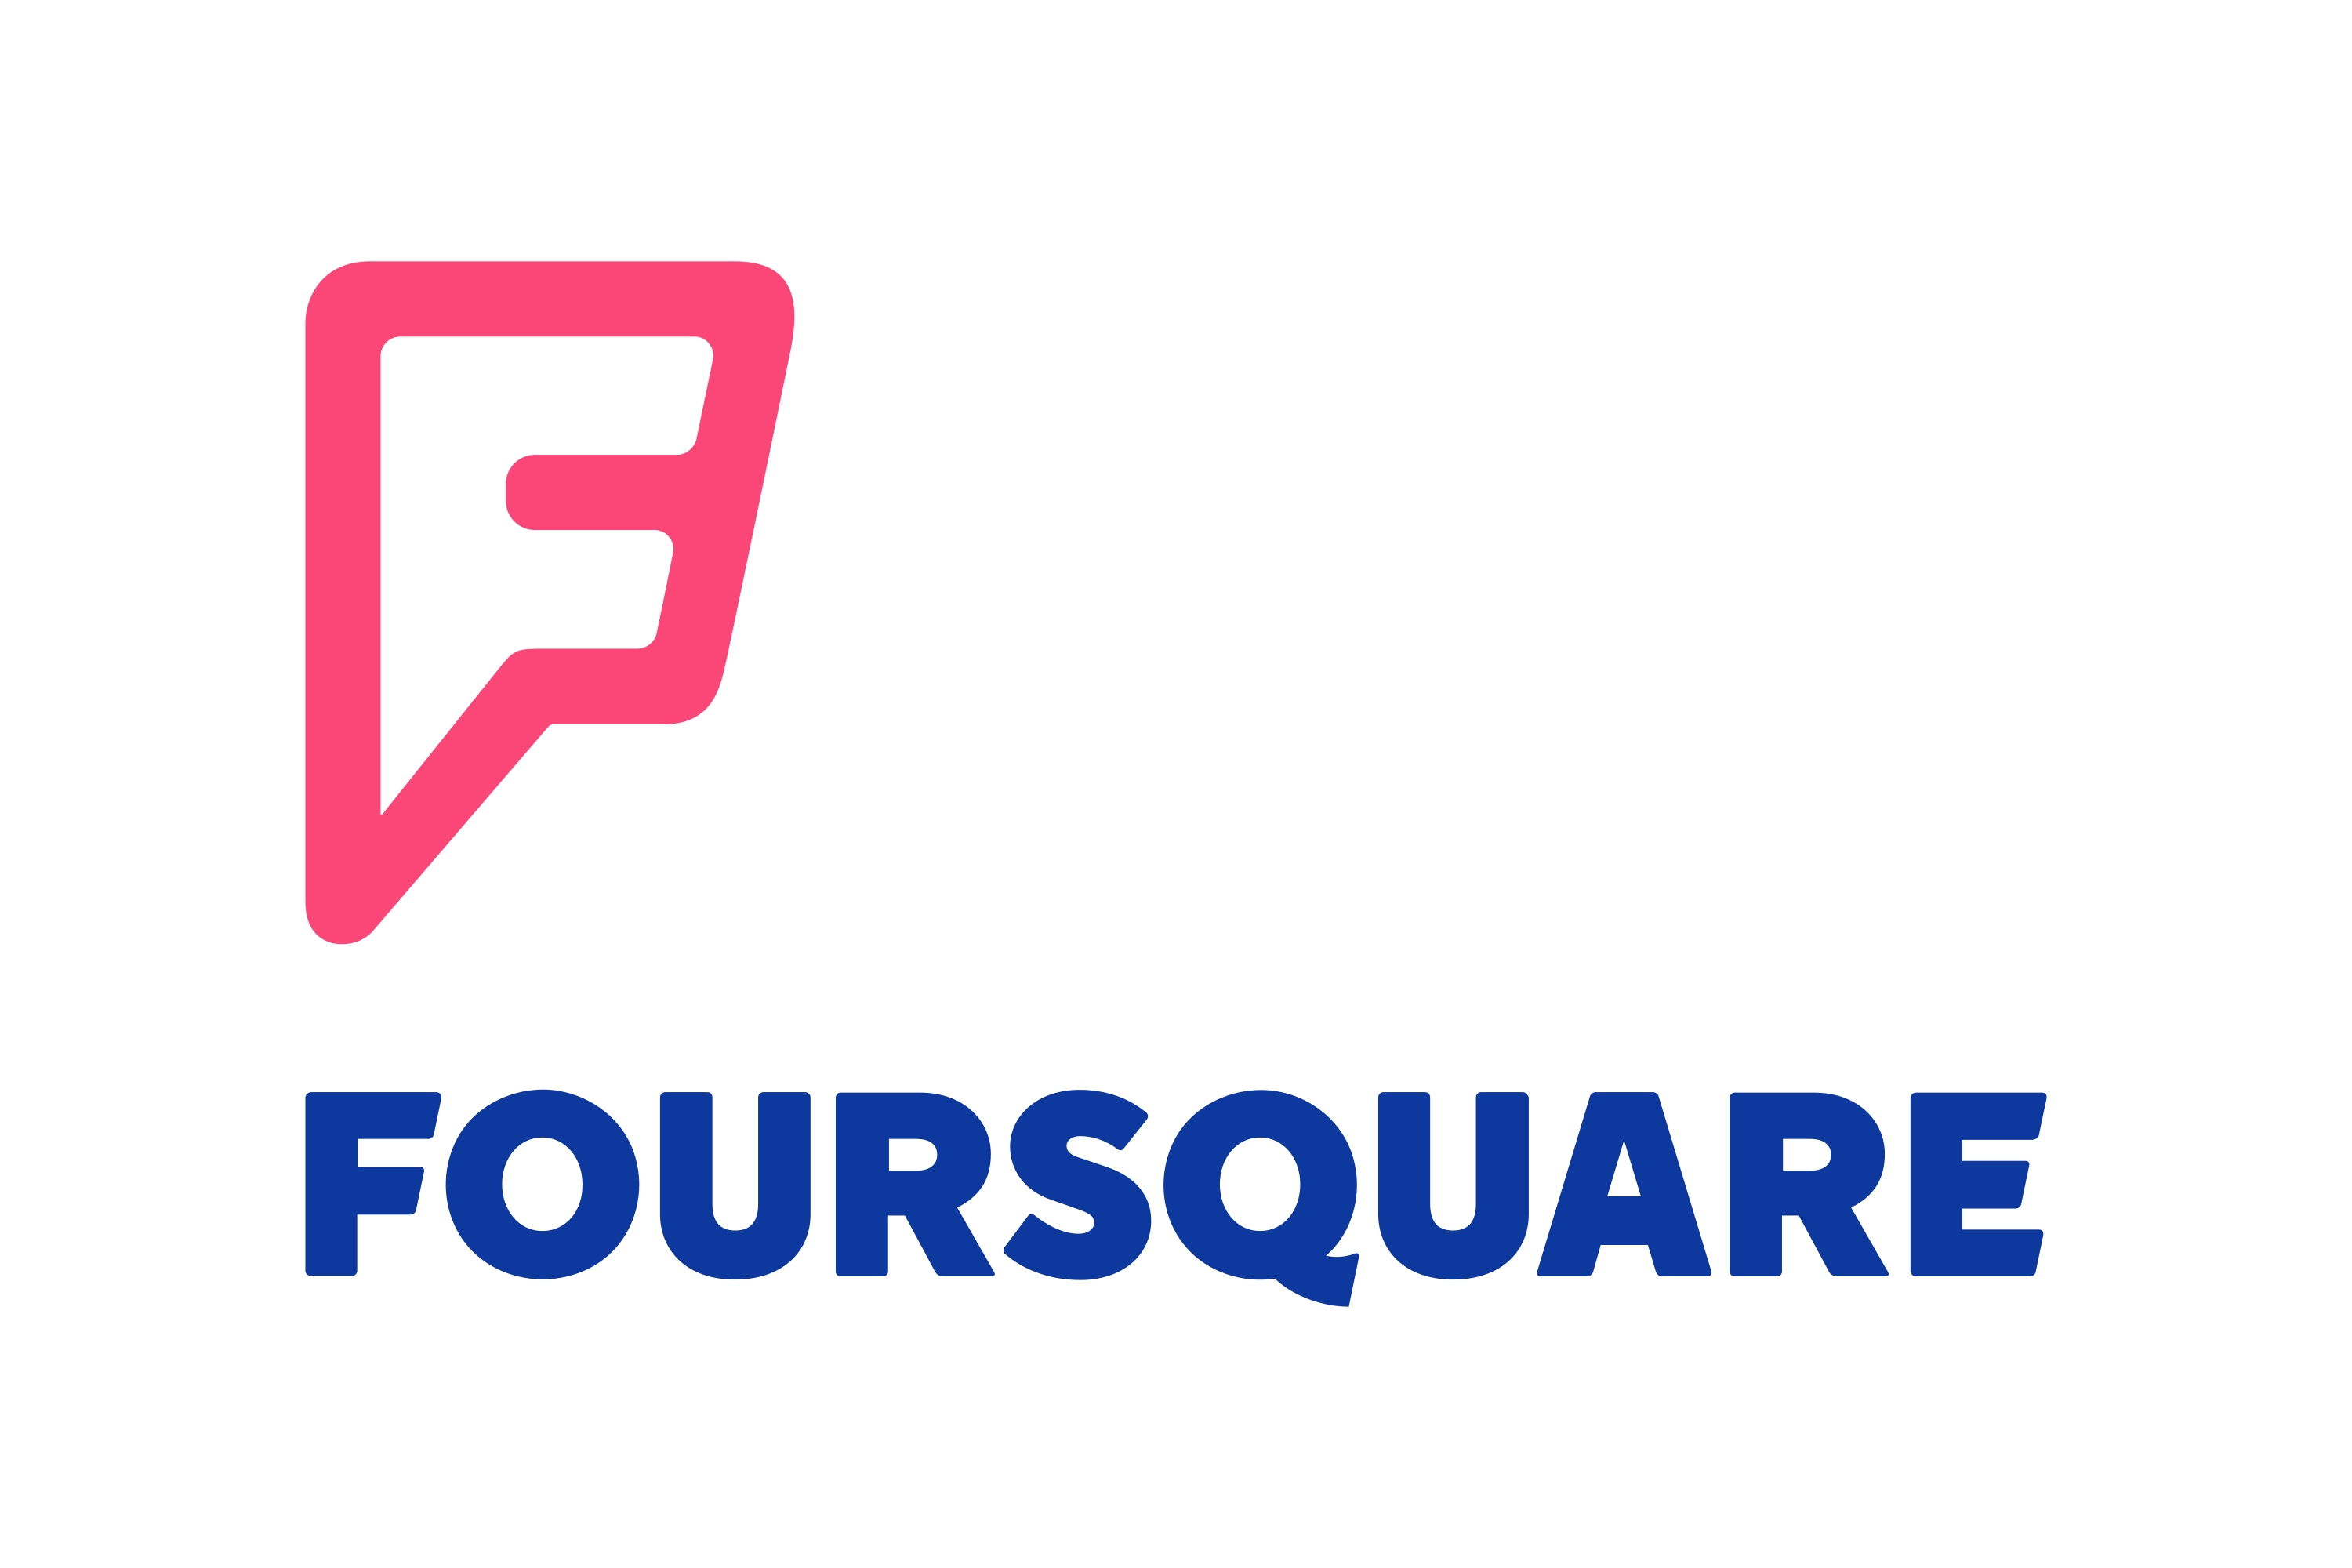 Download Foursquare City Guide Logo in SVG Vector or PNG File Format